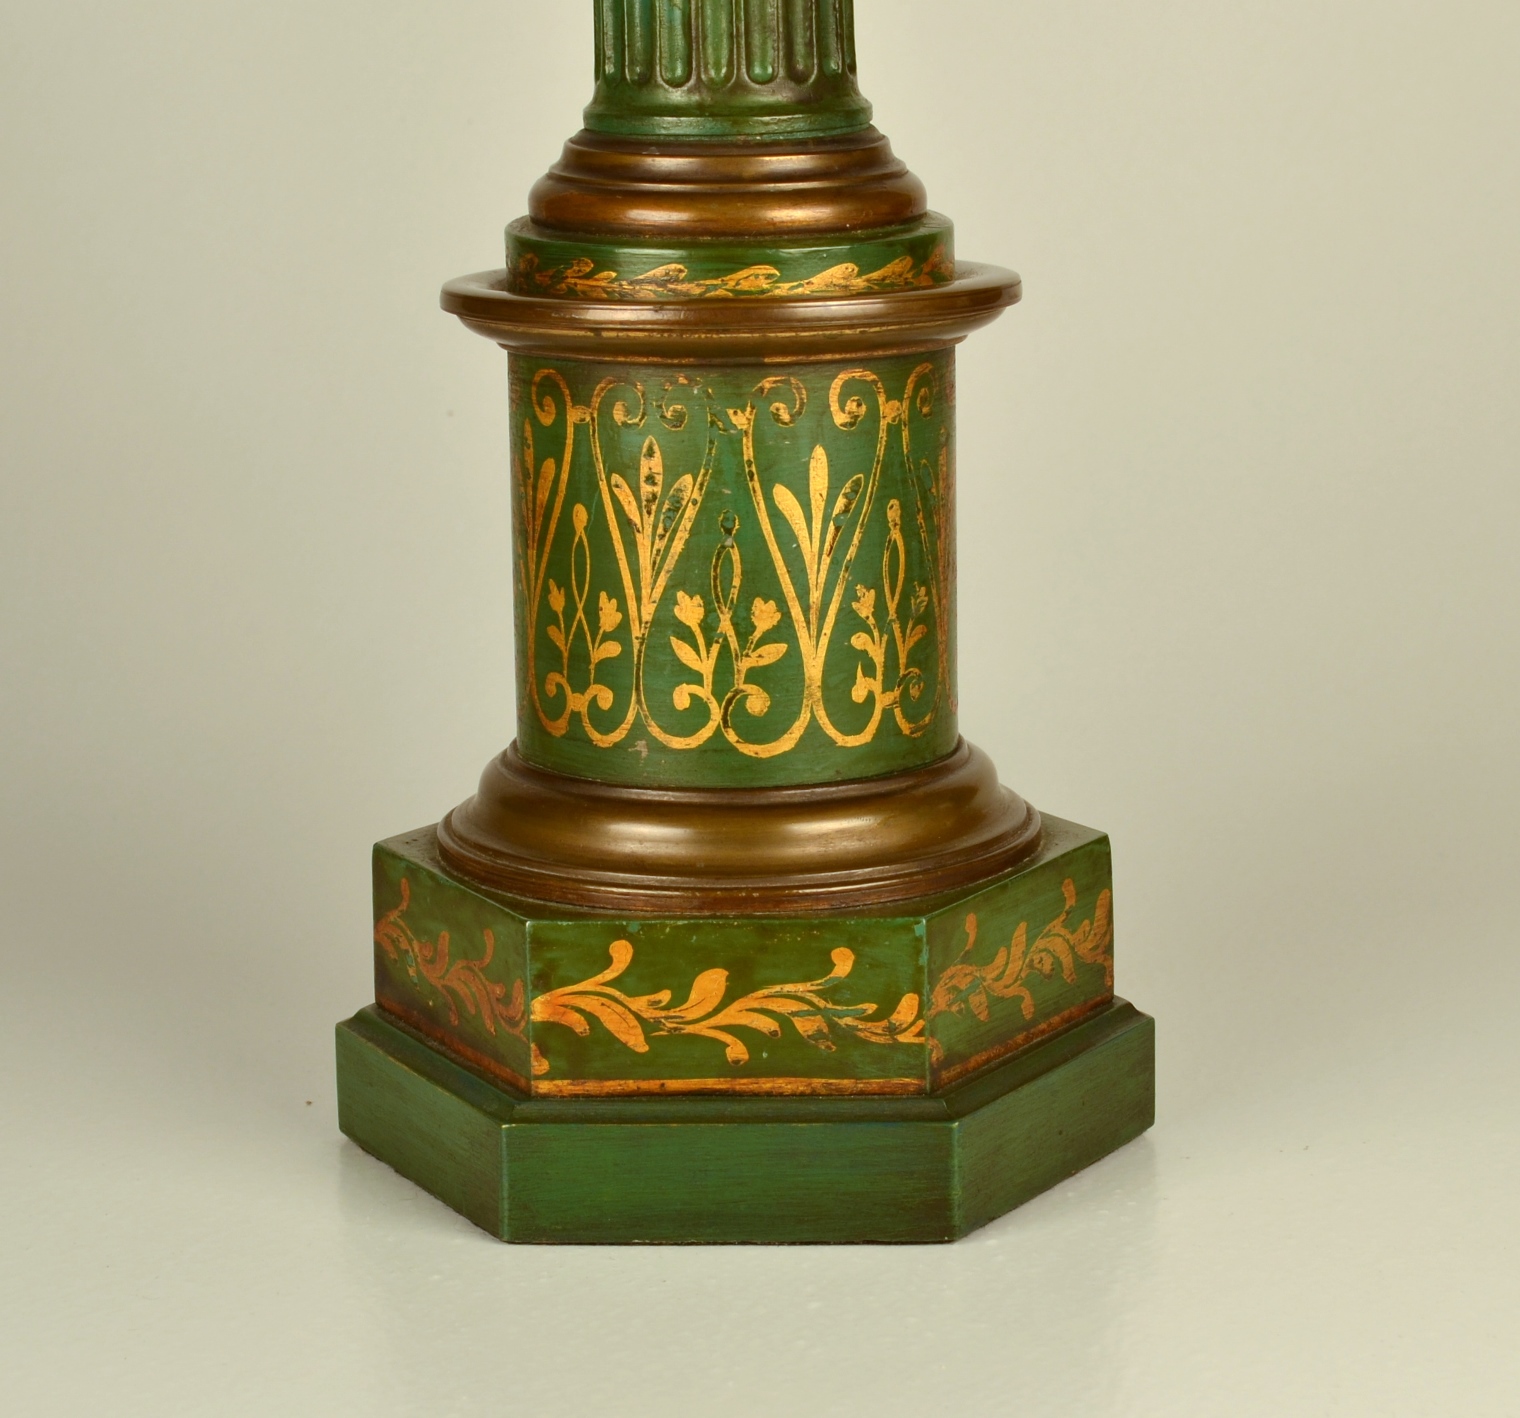 Pair of Green Tole Column Lamps